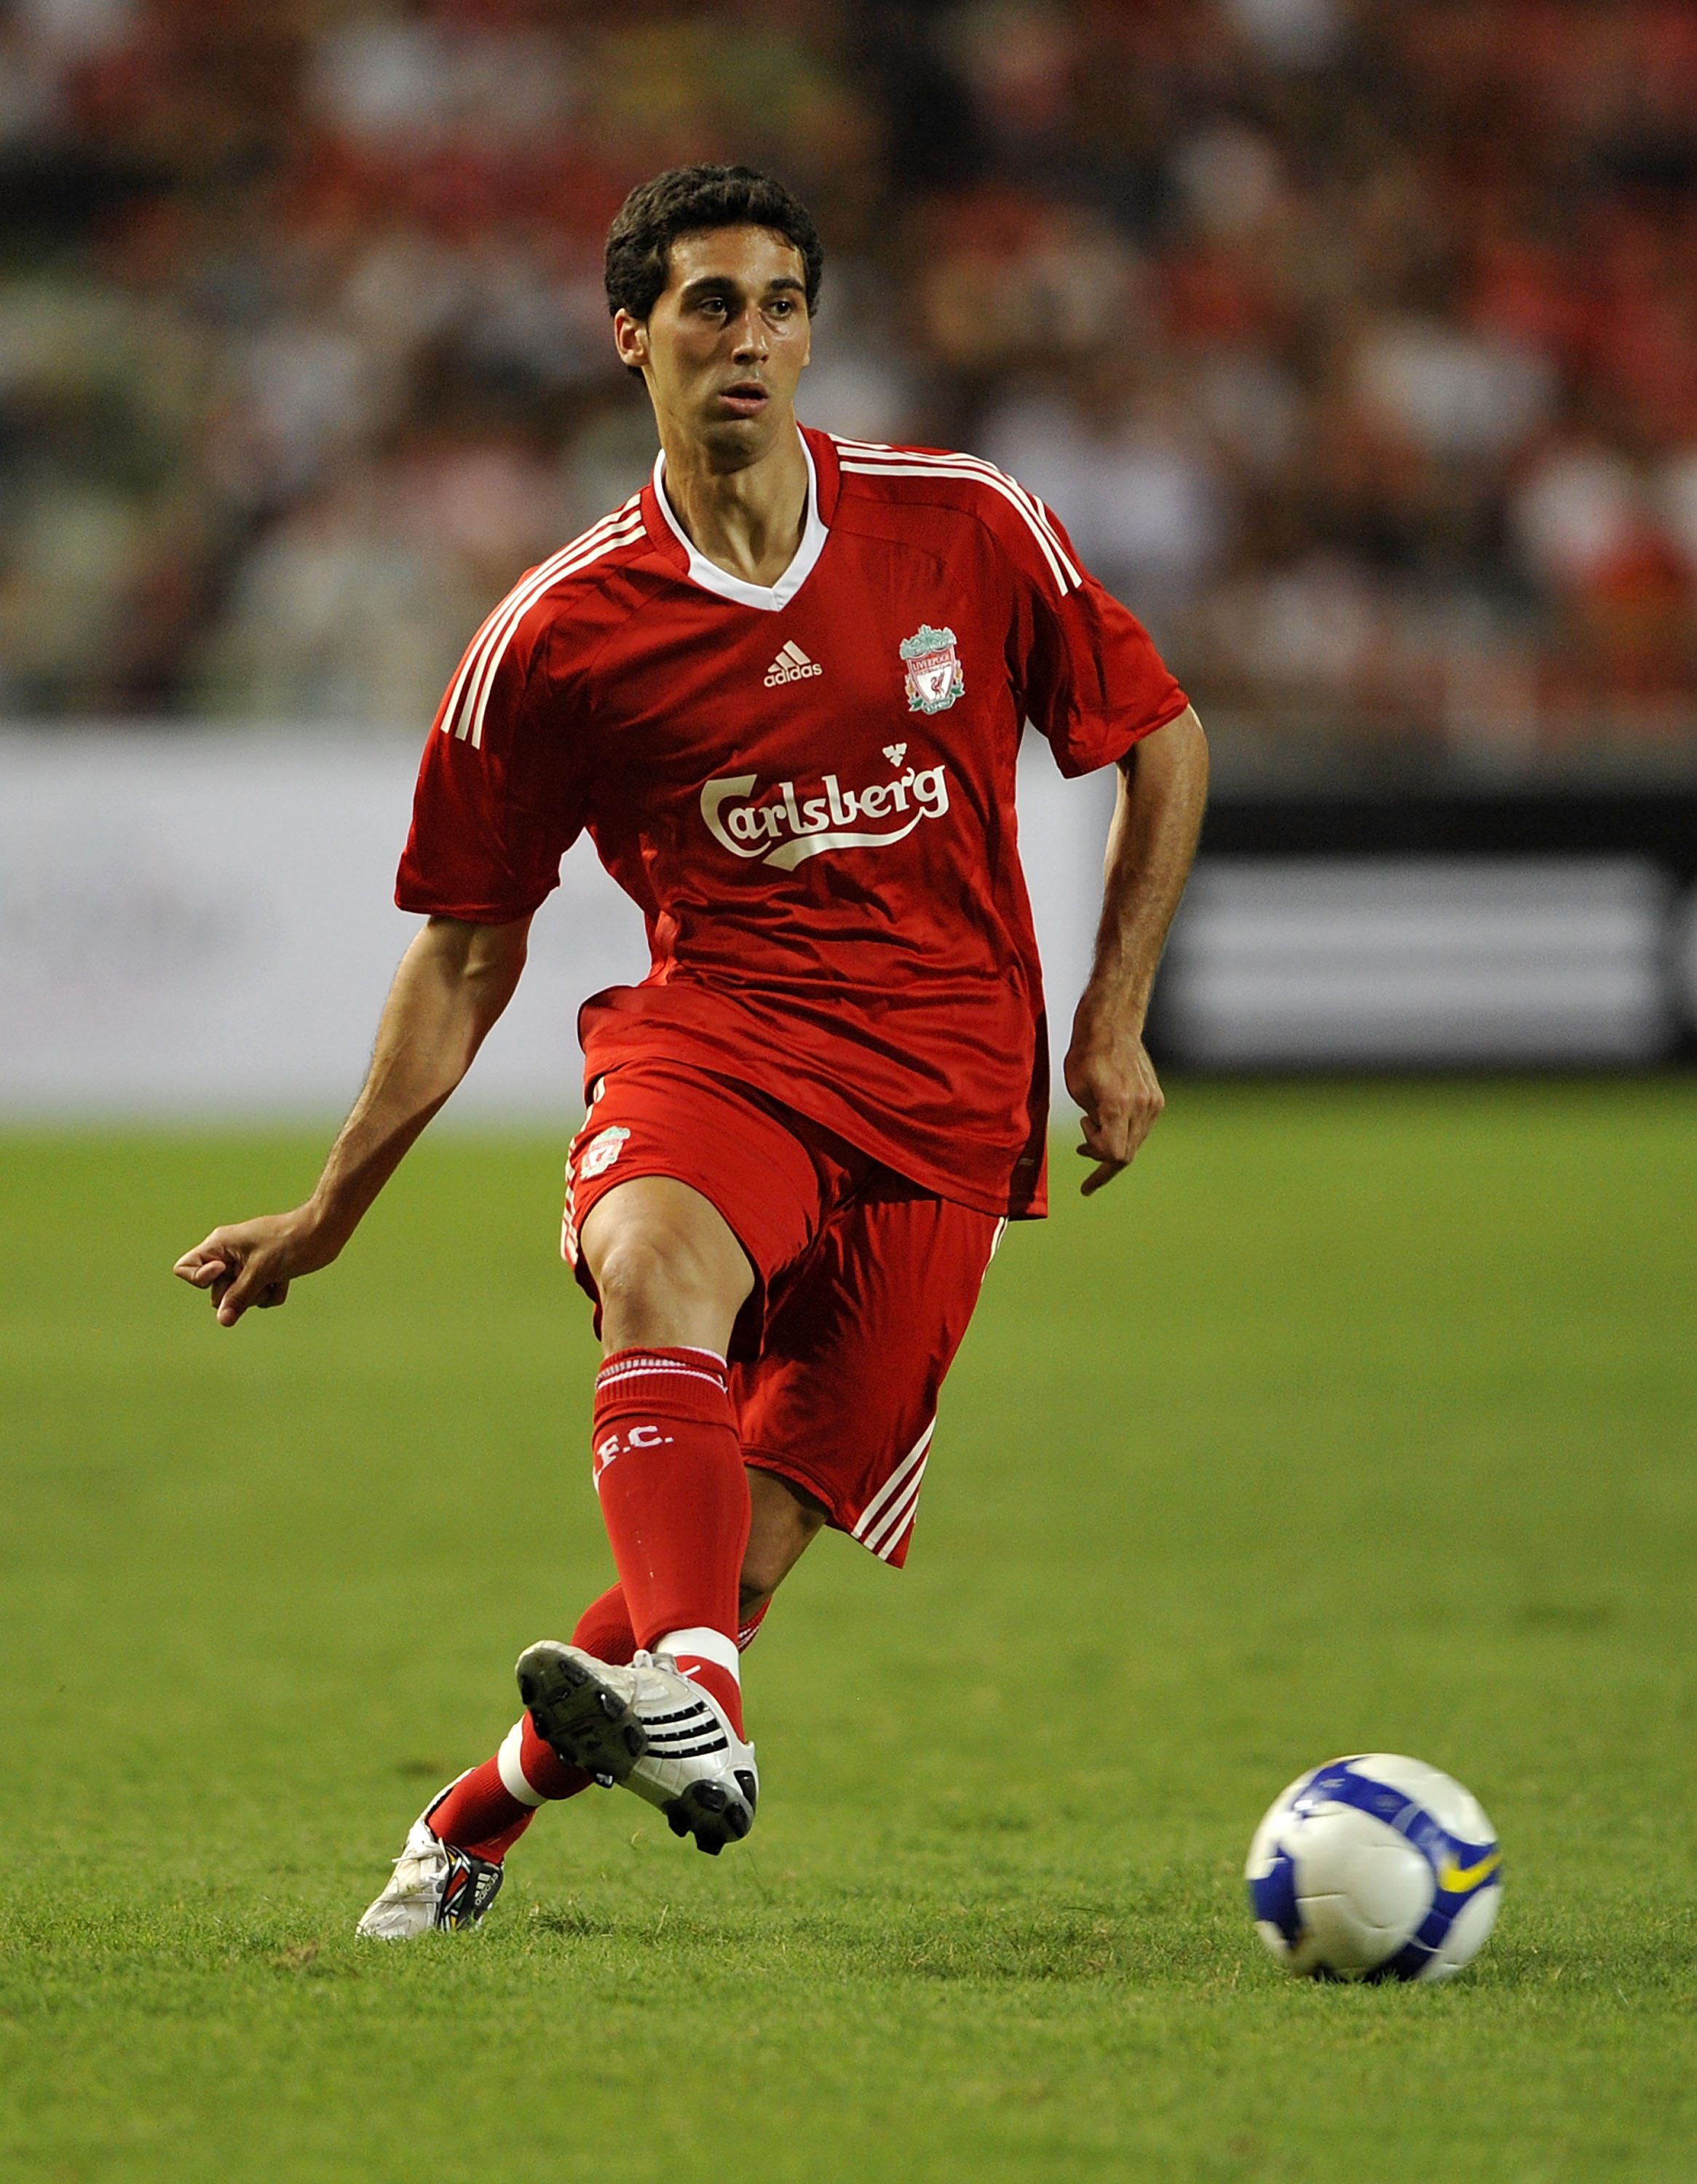 BANGKOK, THAILAND - JULY 22:  Alvaro Arbeloa of Liverpool in action during a pre-season friendly match againts Thailand at the Rajamangala National Stadium on July 22, 2009 in Bangkok, Thailand.  (Photo by Victor Fraile/Getty Images)